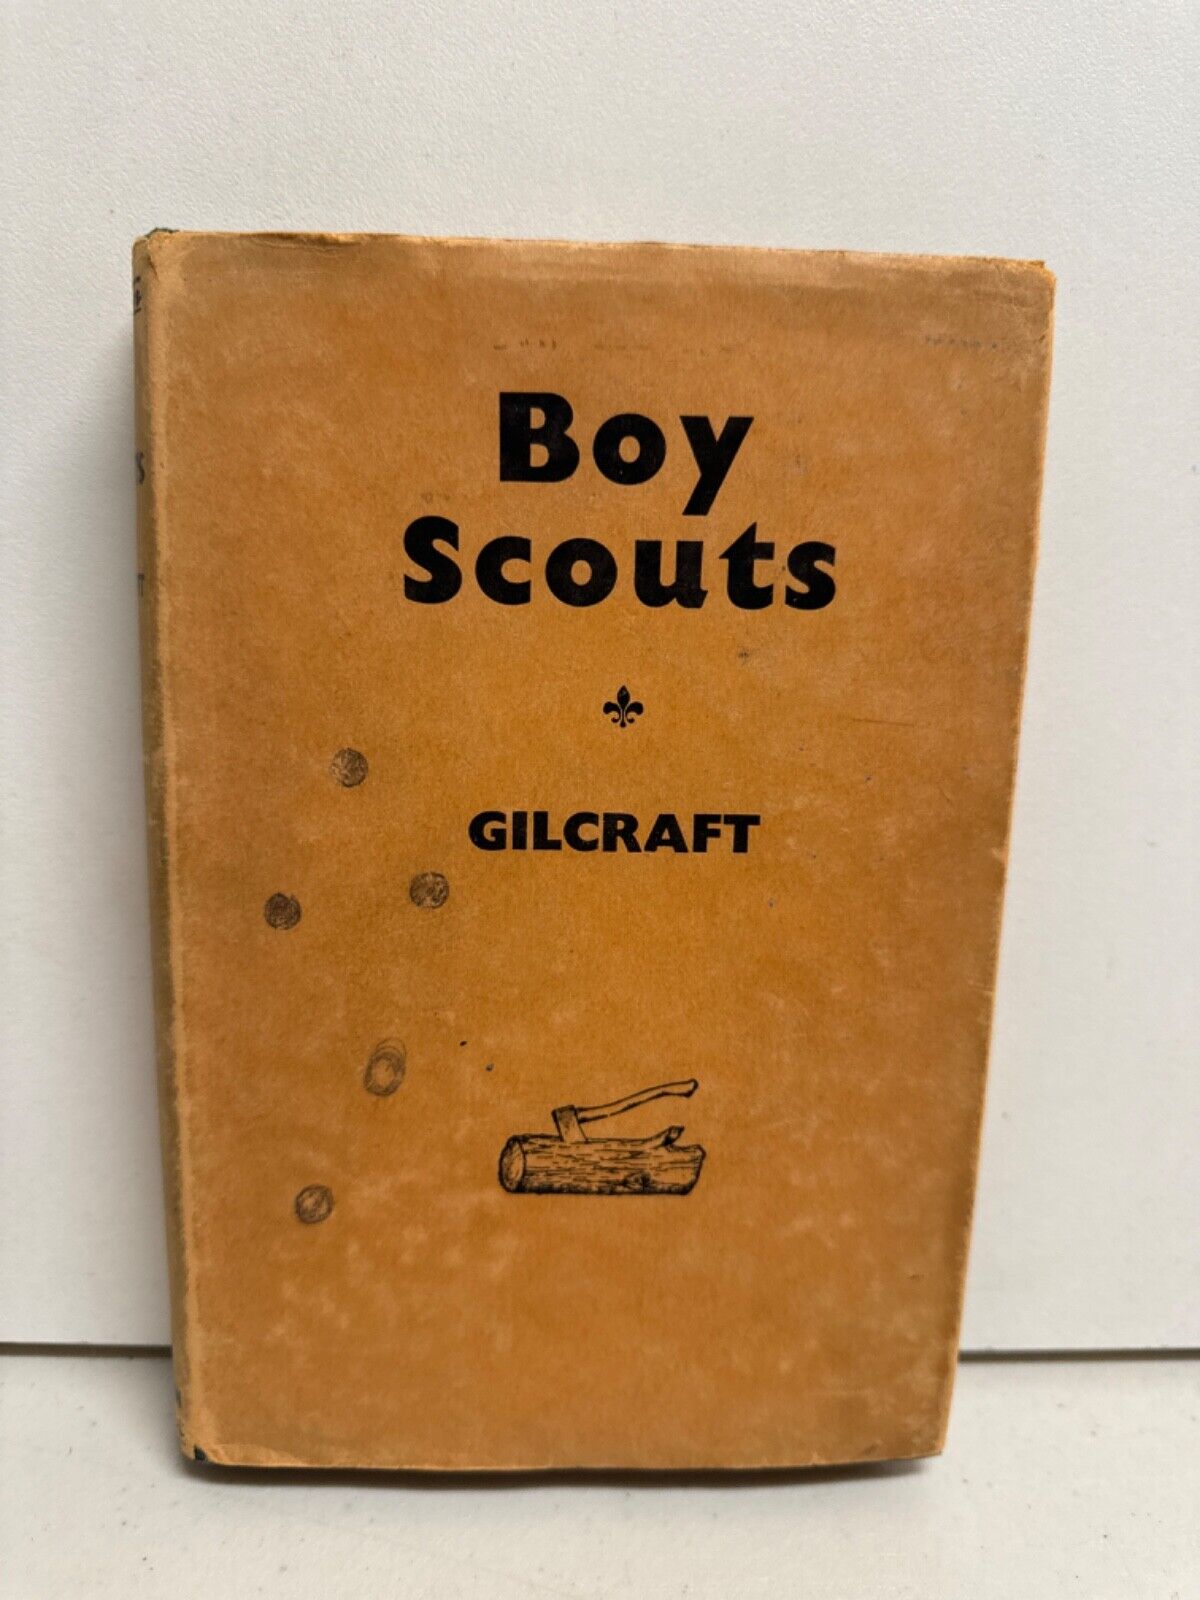 Boy Scouts Book By Gilcraft No. 8 1934